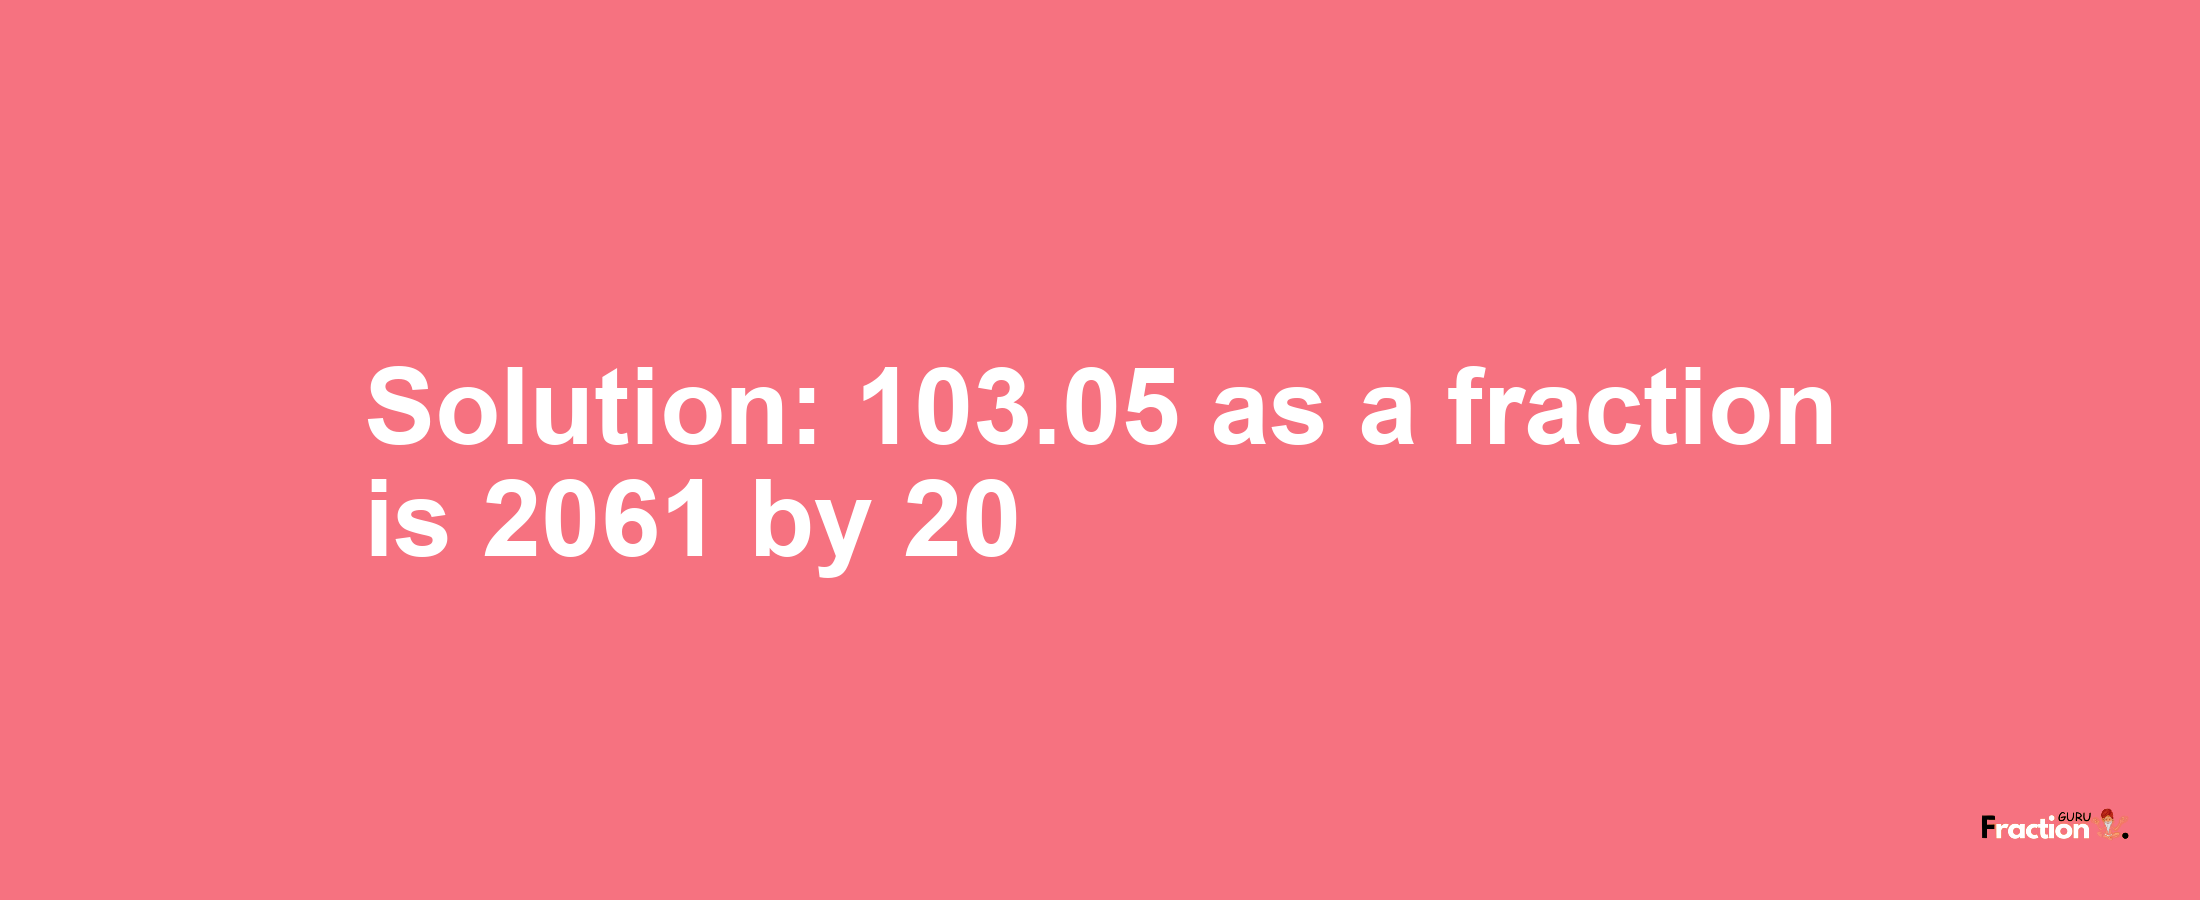 Solution:103.05 as a fraction is 2061/20